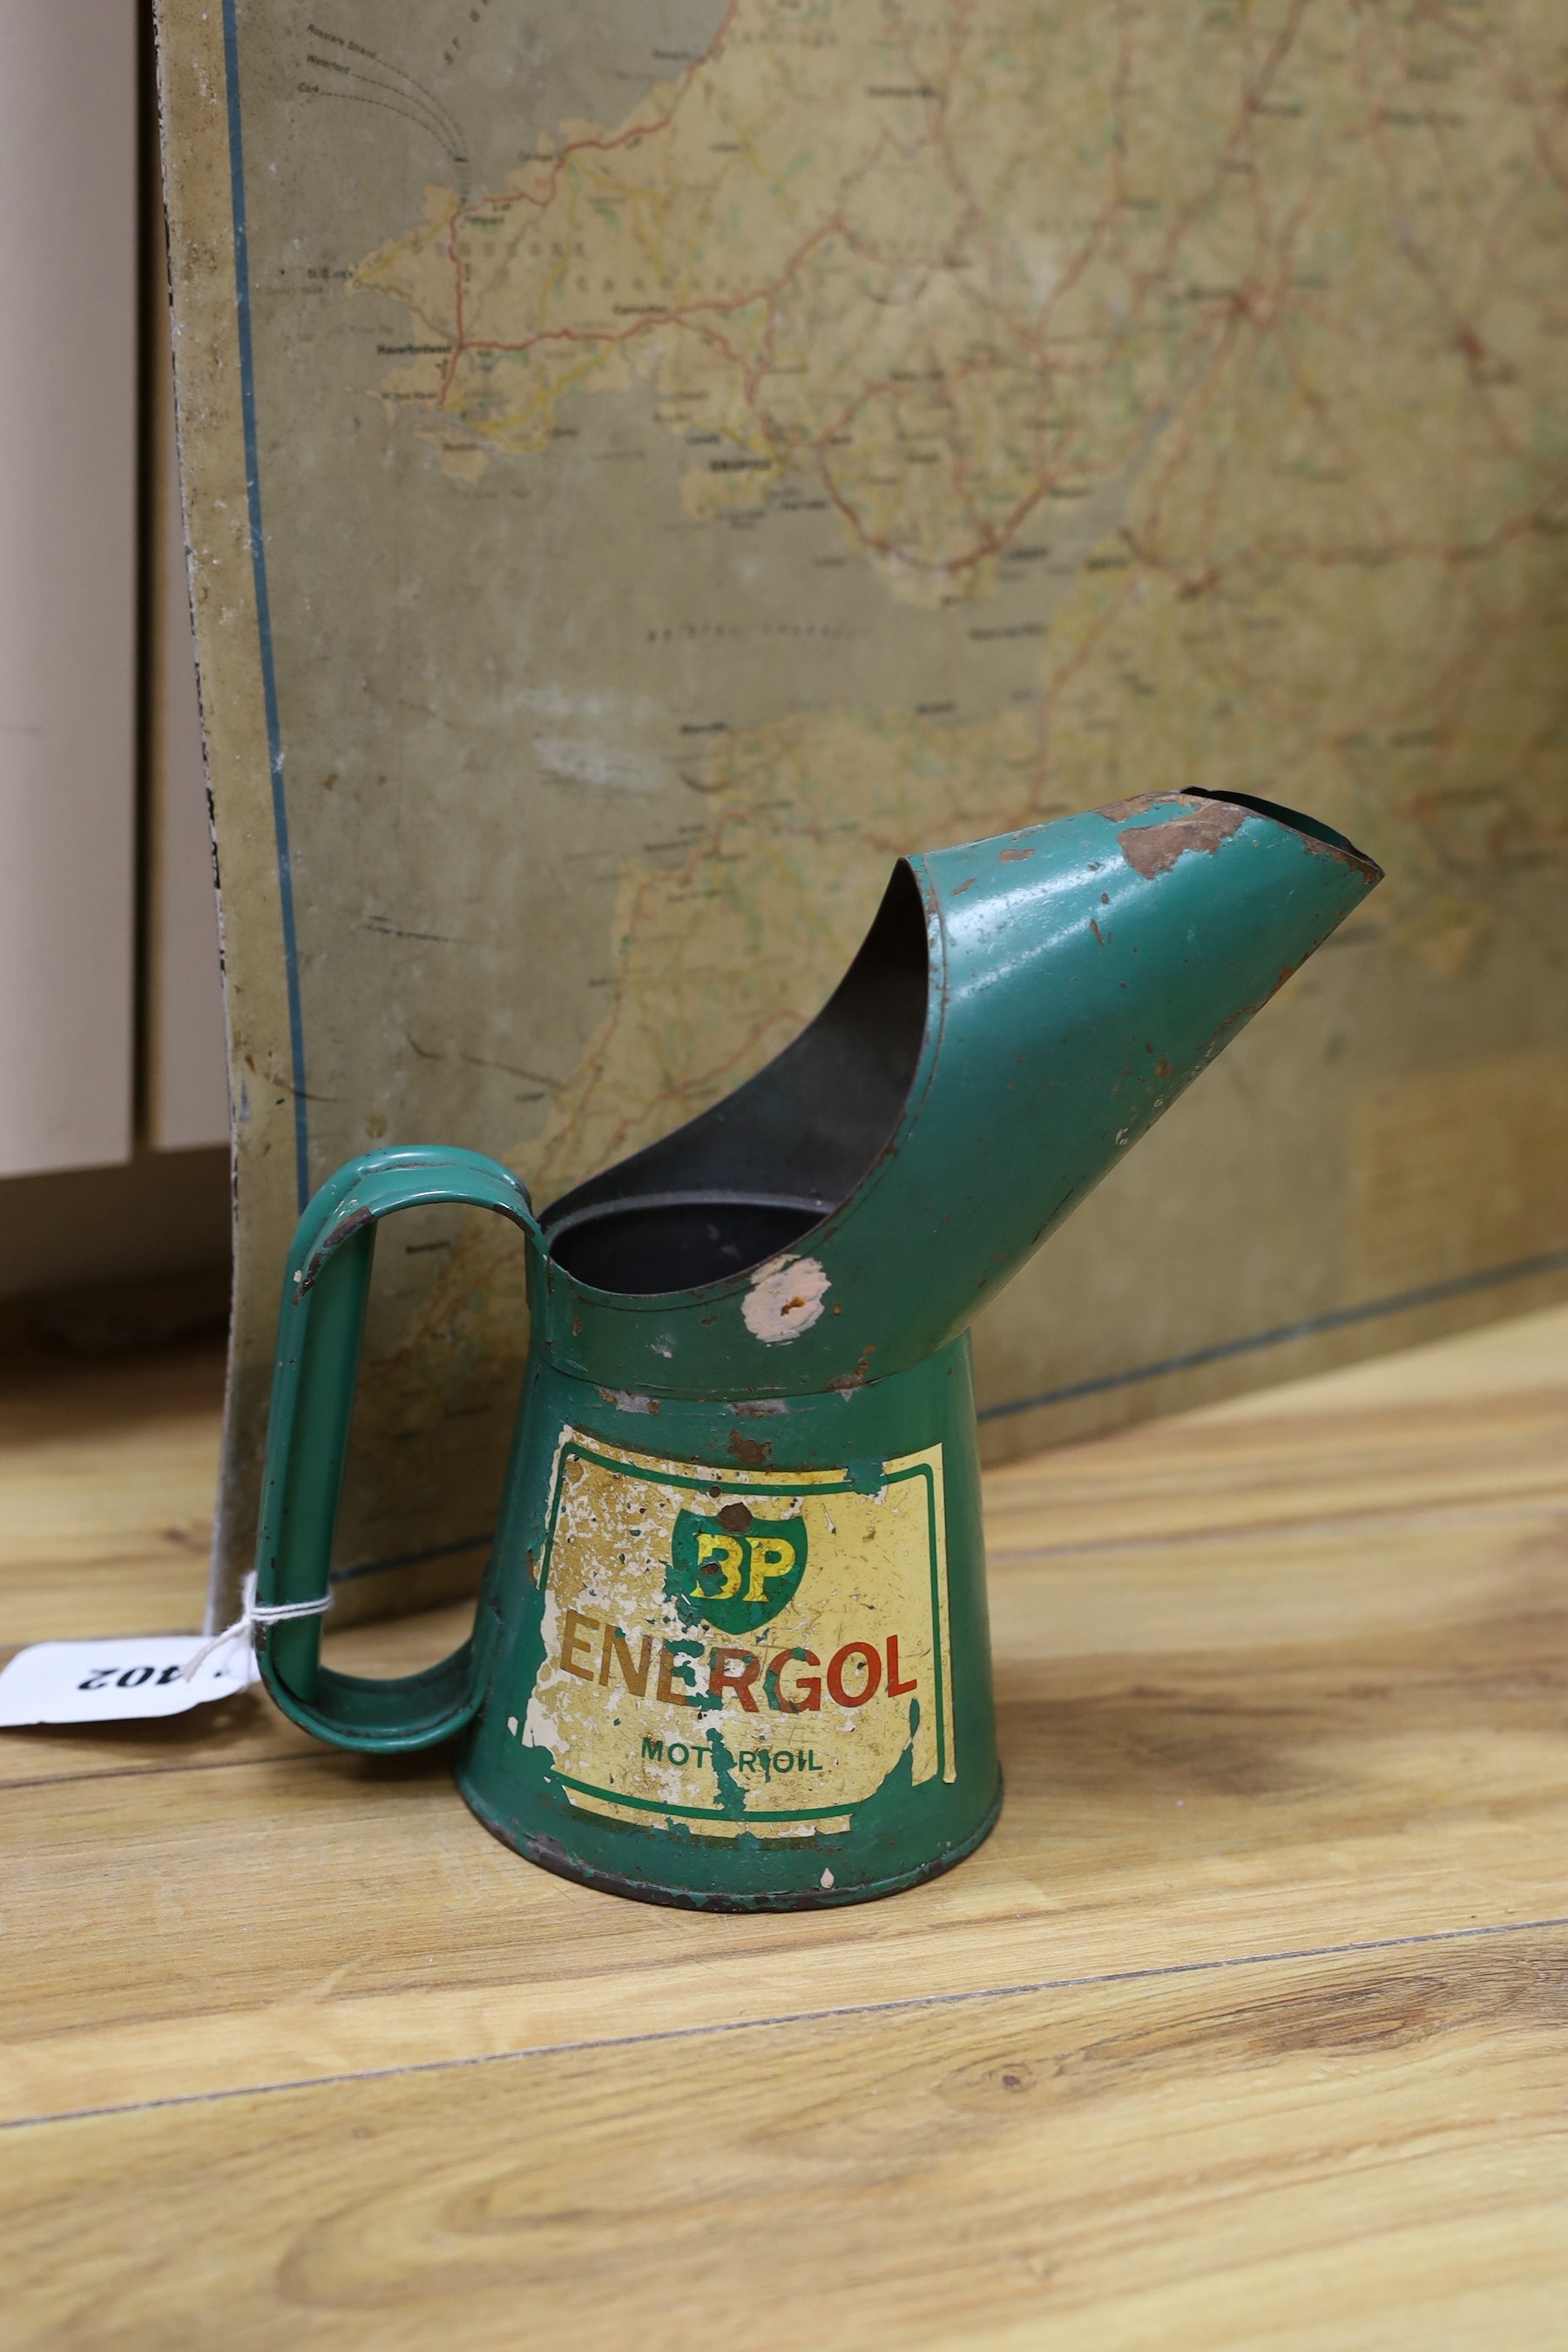 A BP oil can, Michelin motoring map and a revolving globe.